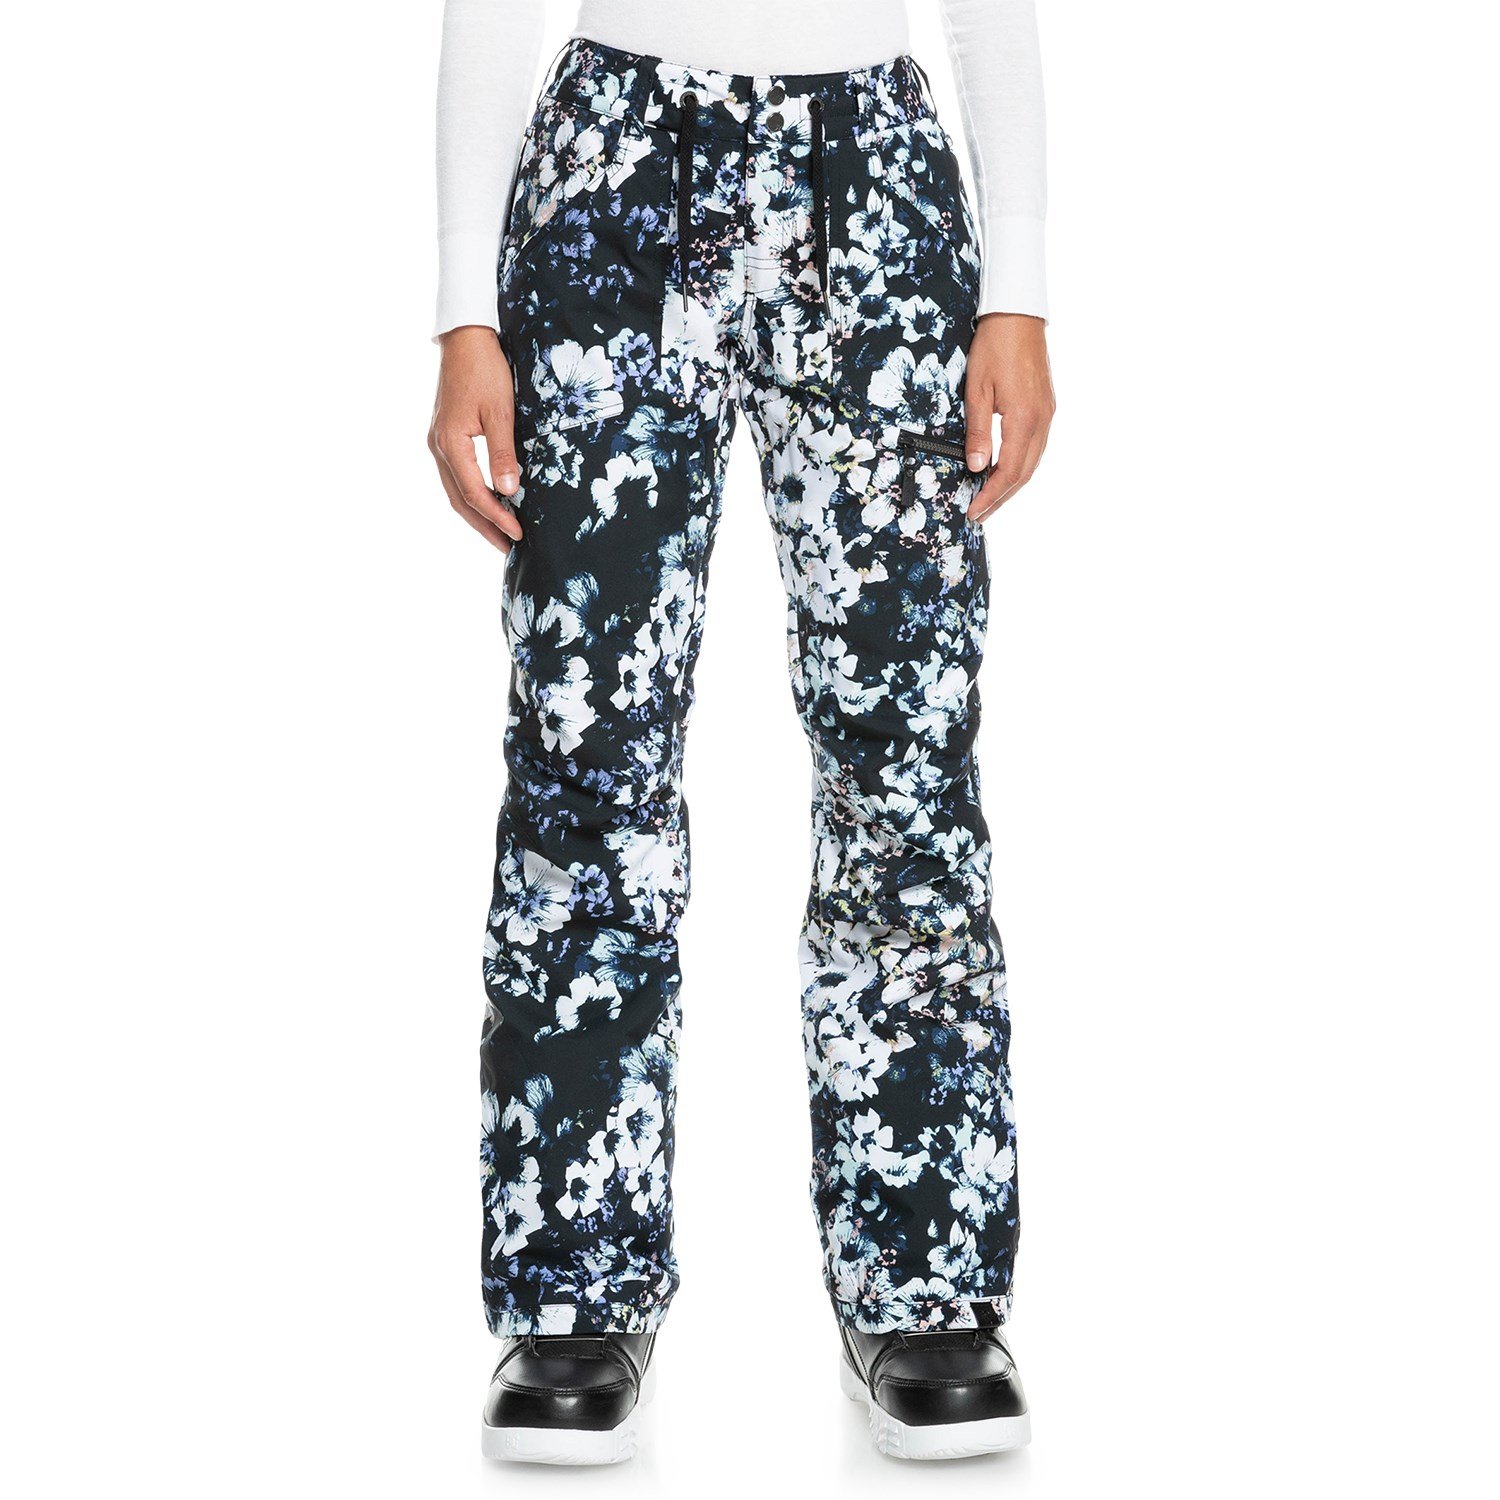 Patterned Pants For Women | Gap Factory